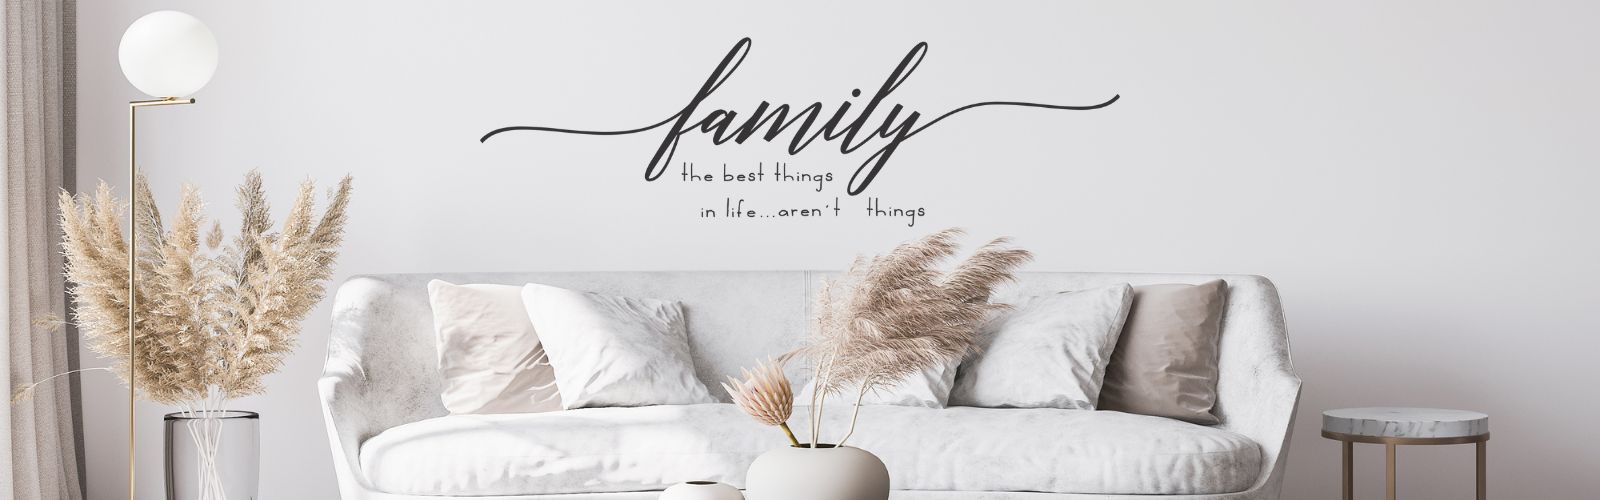 Beautiful family inspired vinyl wall decals displayed on a living room wall by The Simple Stencil